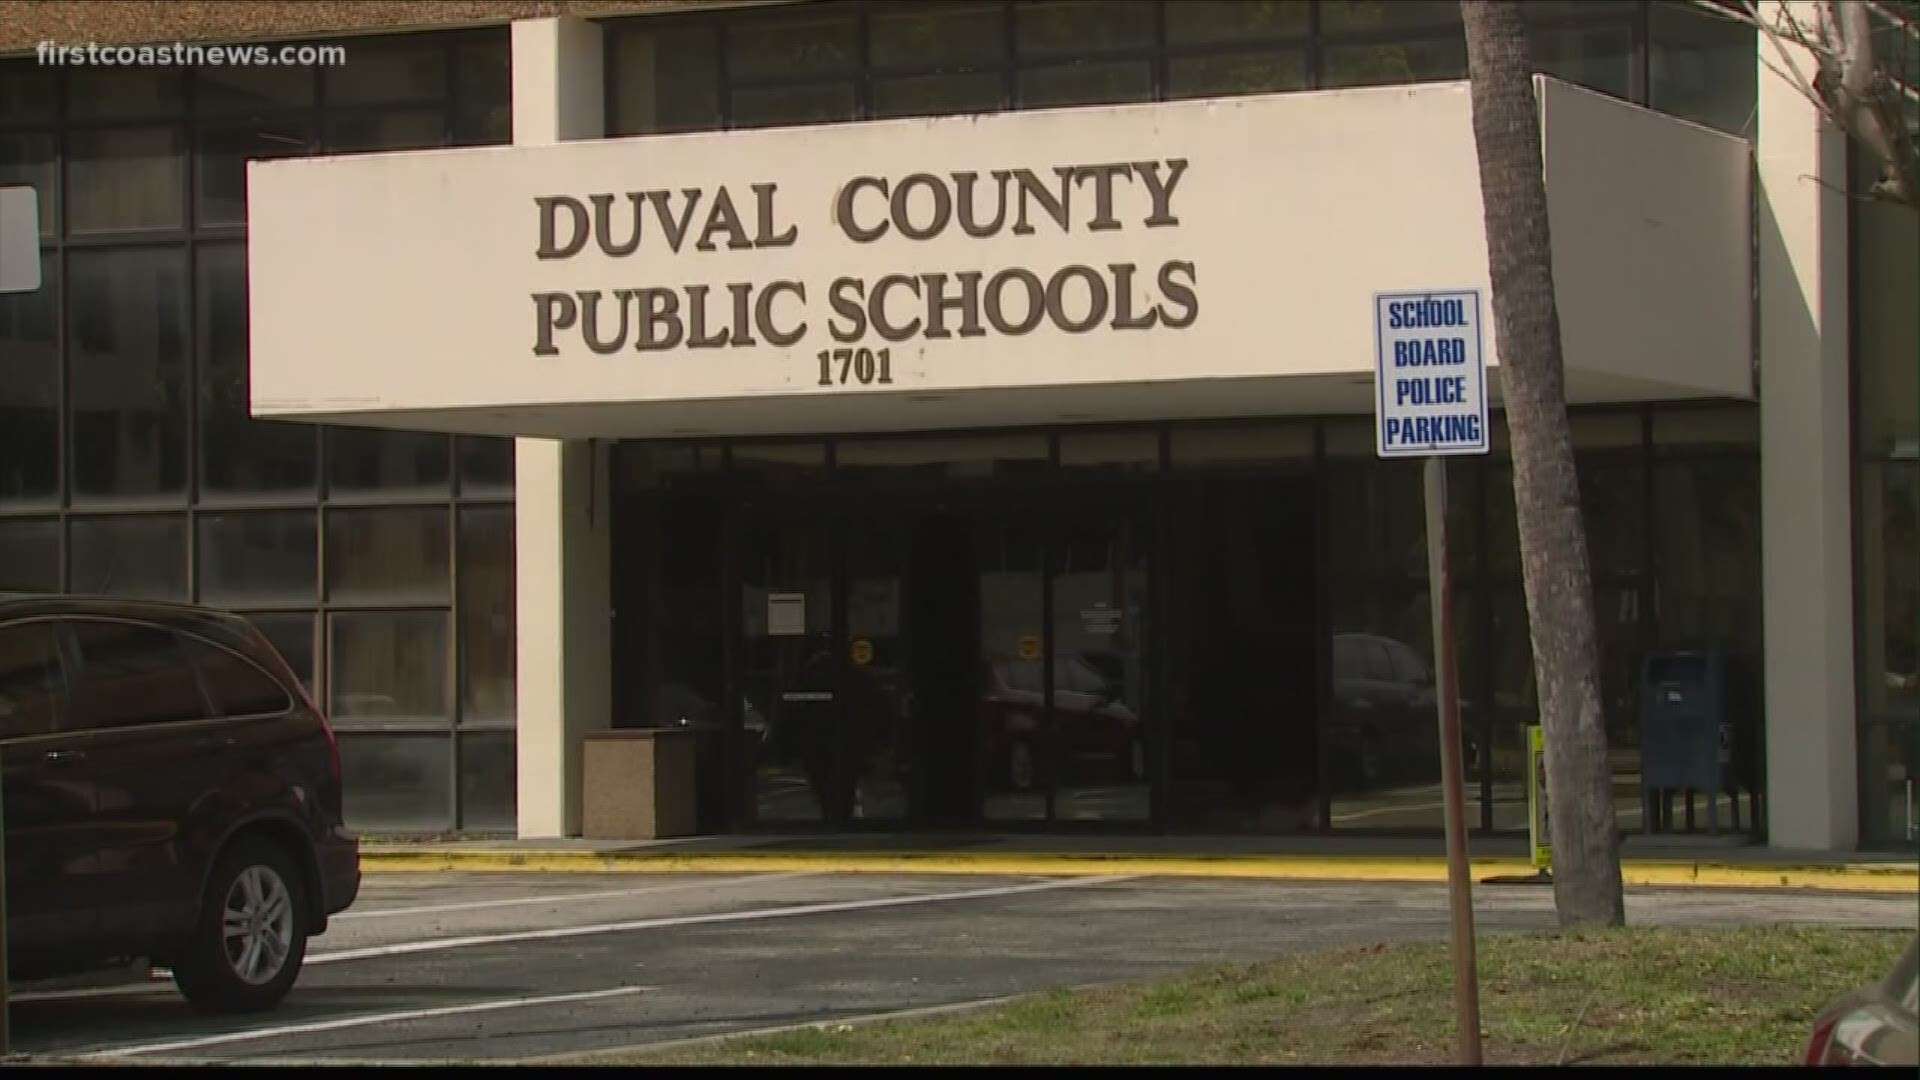 Over the next few days Duval County students who need laptops will pick them up and on Monday elementary students will get educational packets delivered.